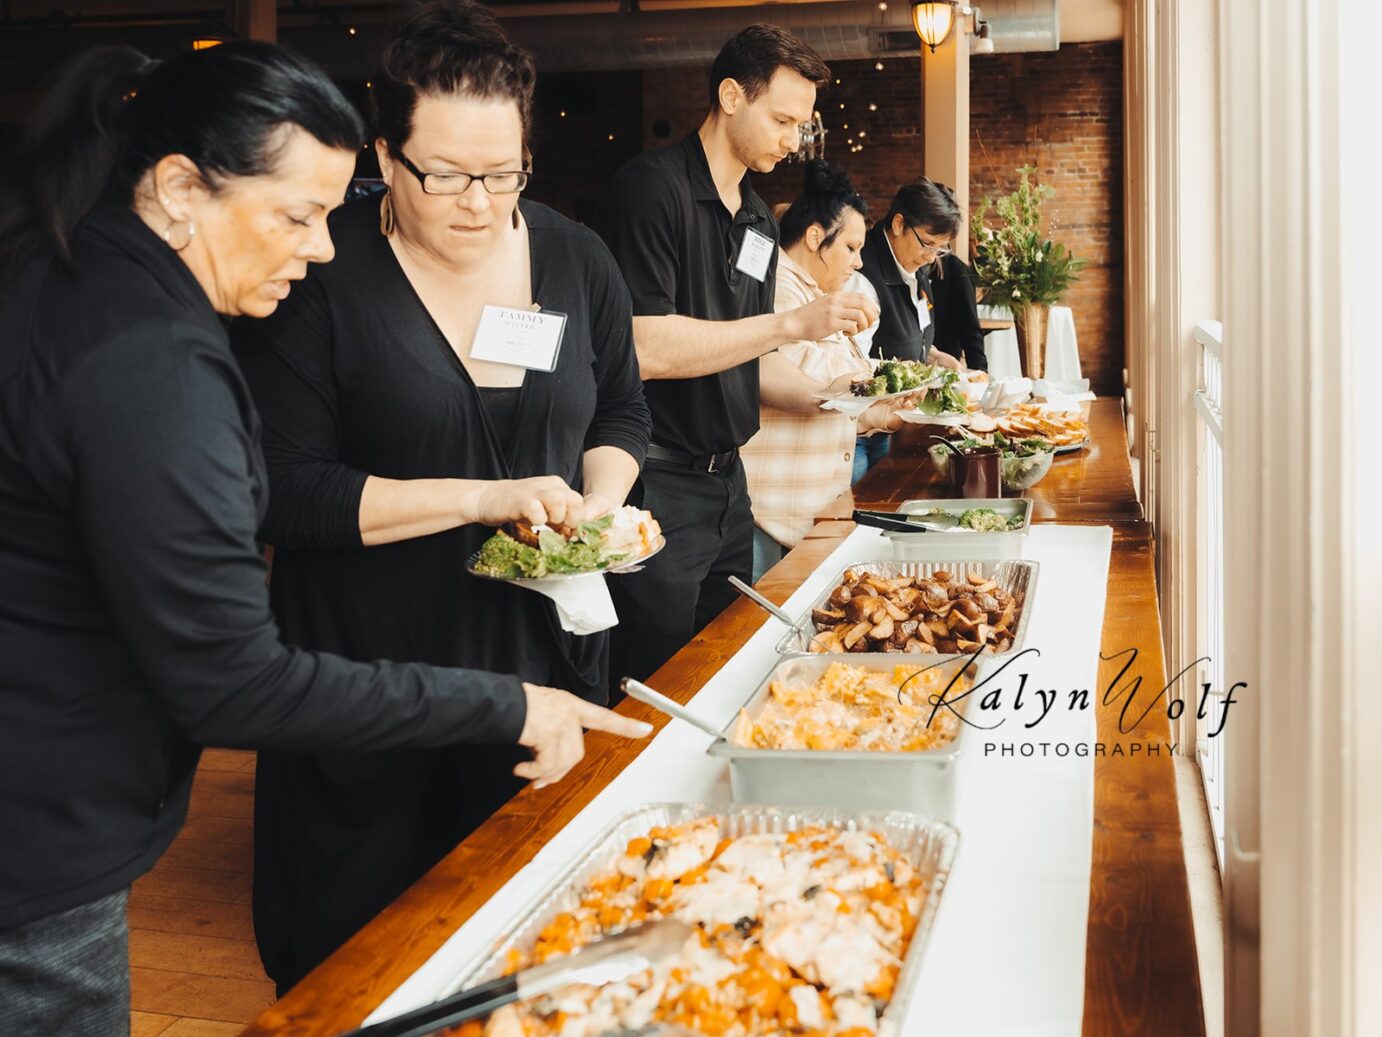 Bella Vida Catering at our March event